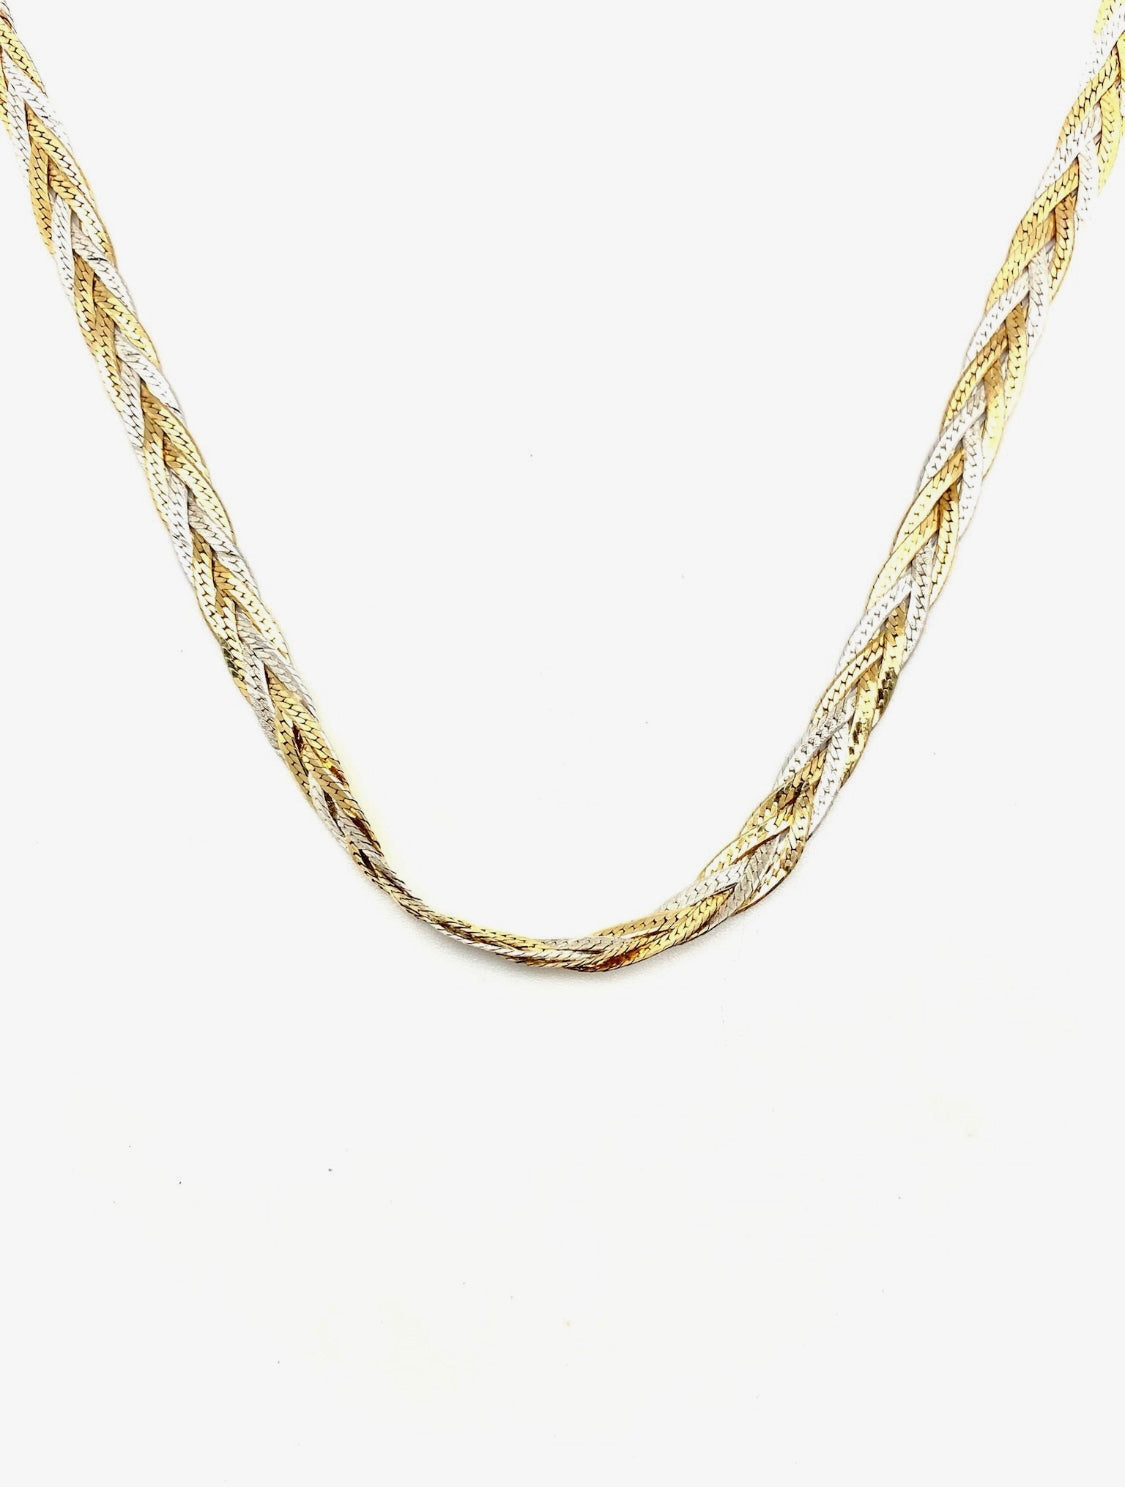 Sold at Auction: 18K TRI TONE GOLD BRAIDED HERRINGBONE NECKLACE